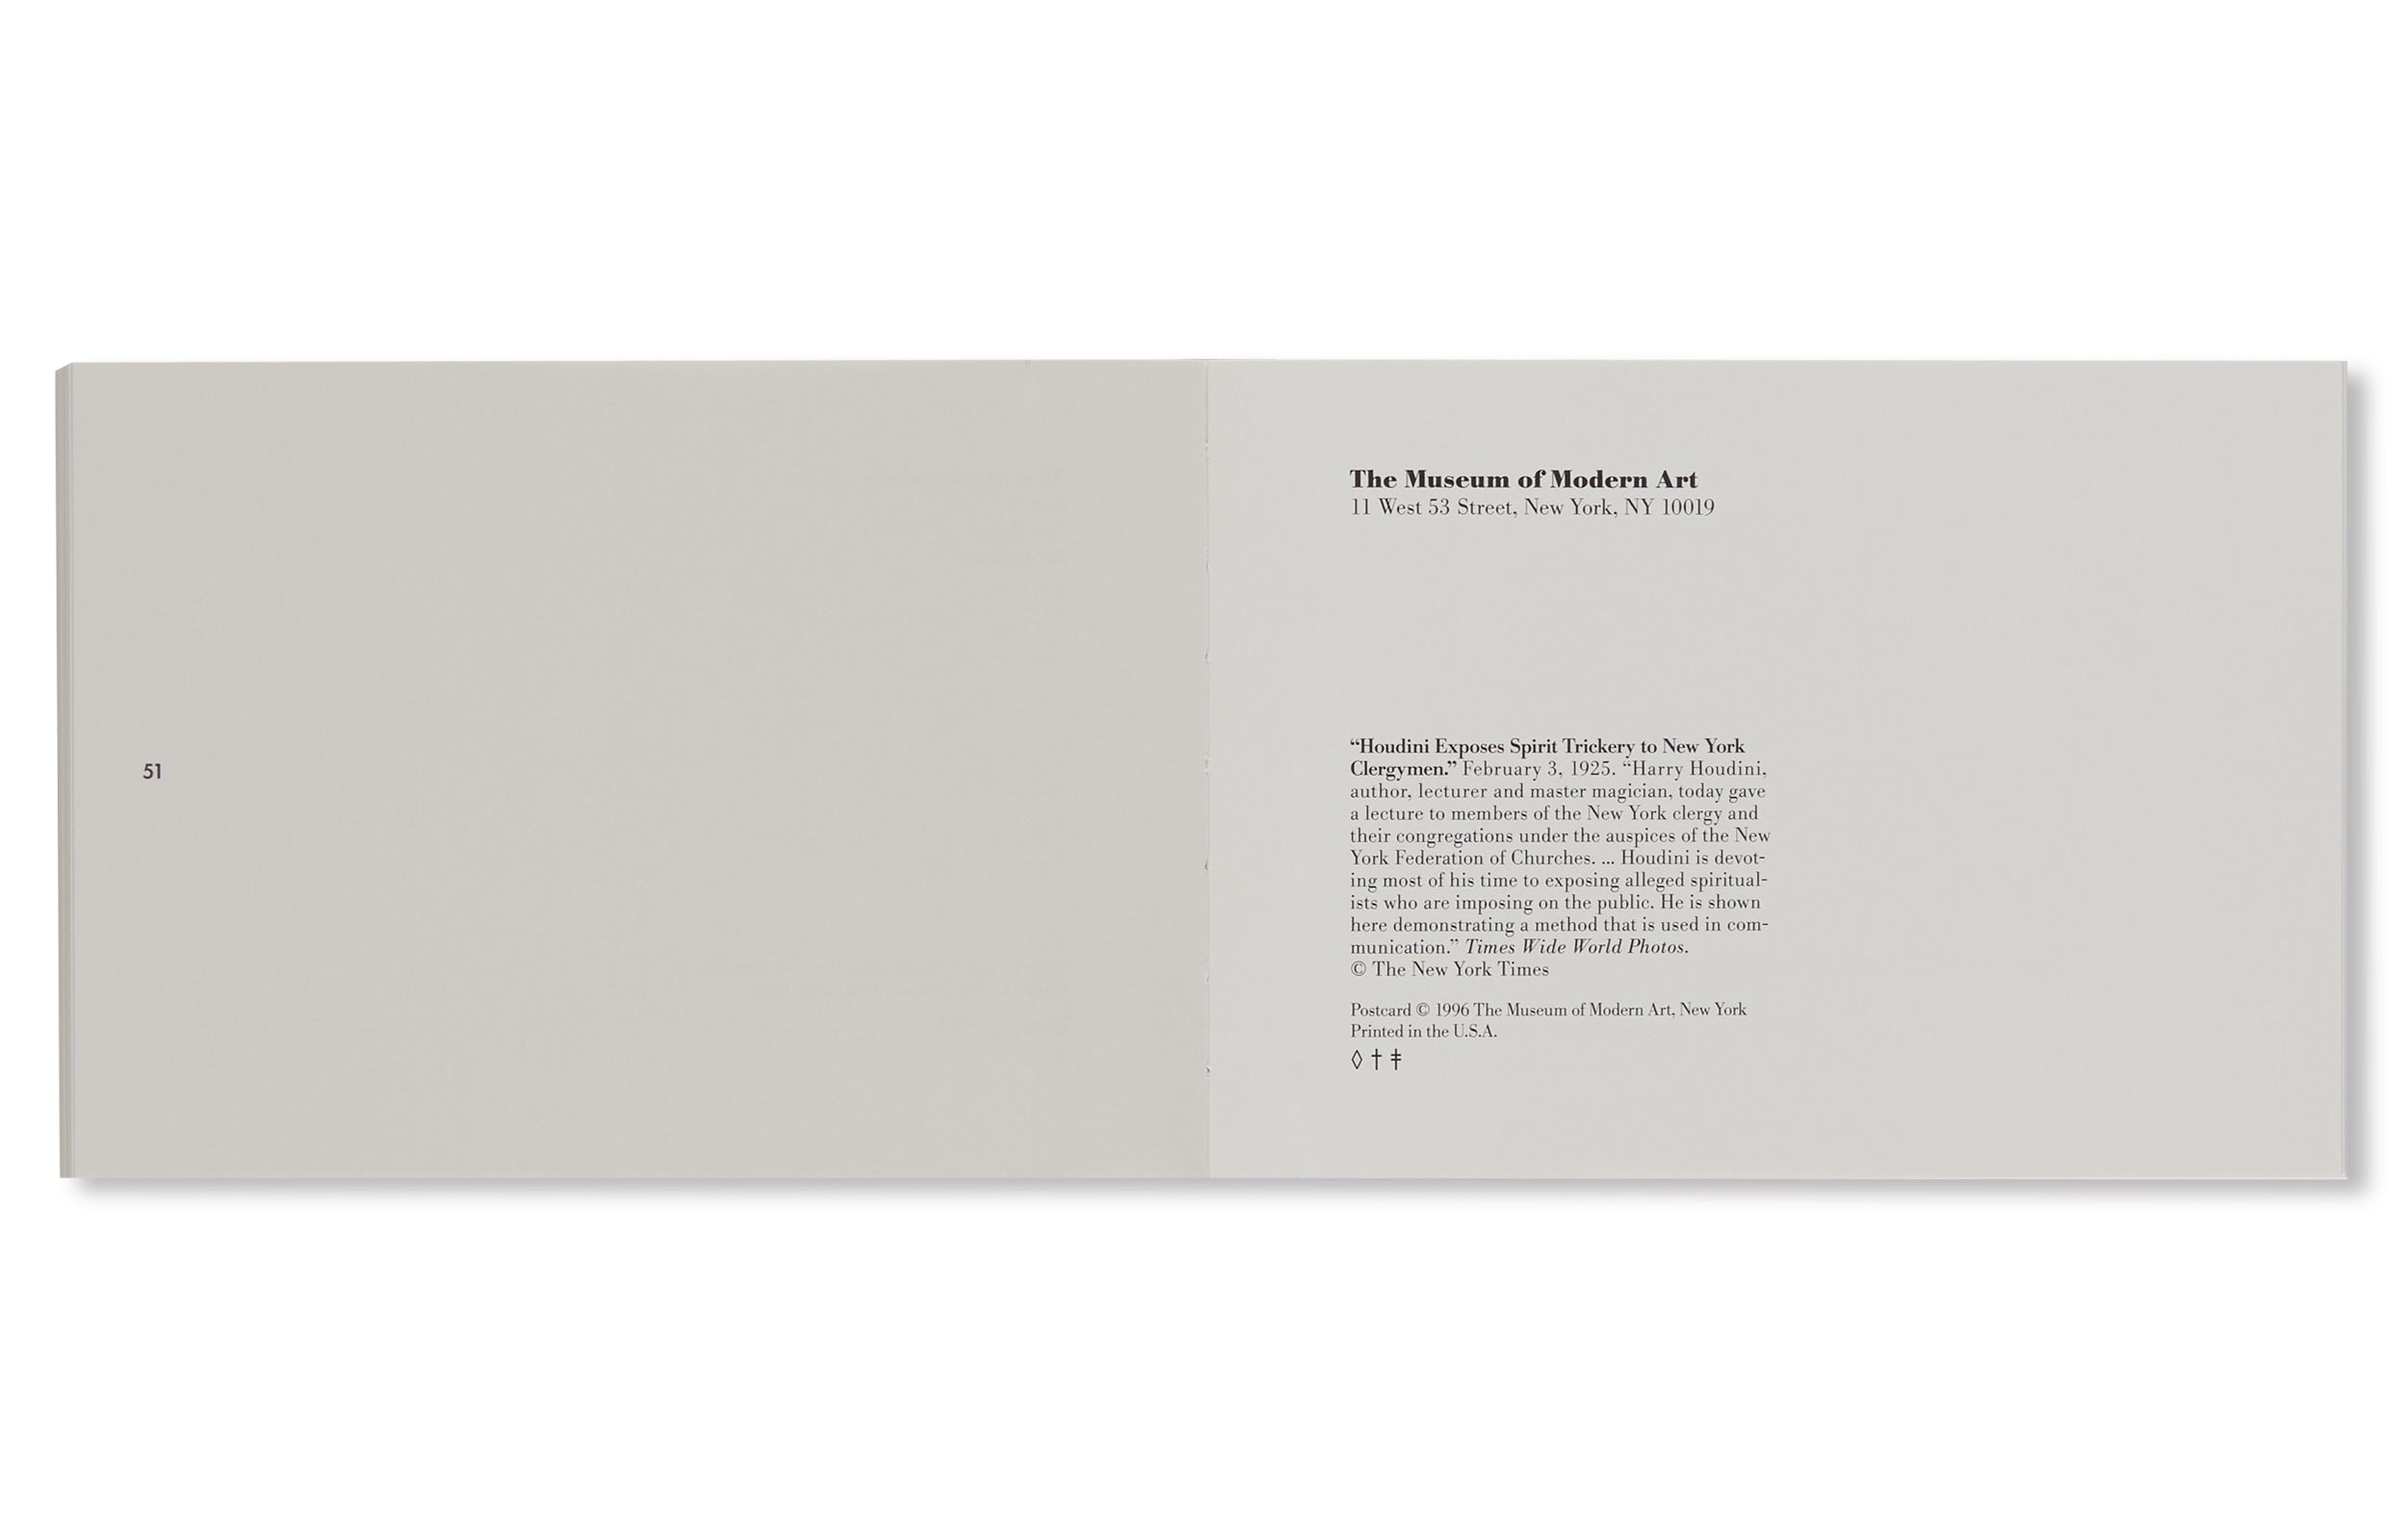 82 POSTCARDS by Roni Horn